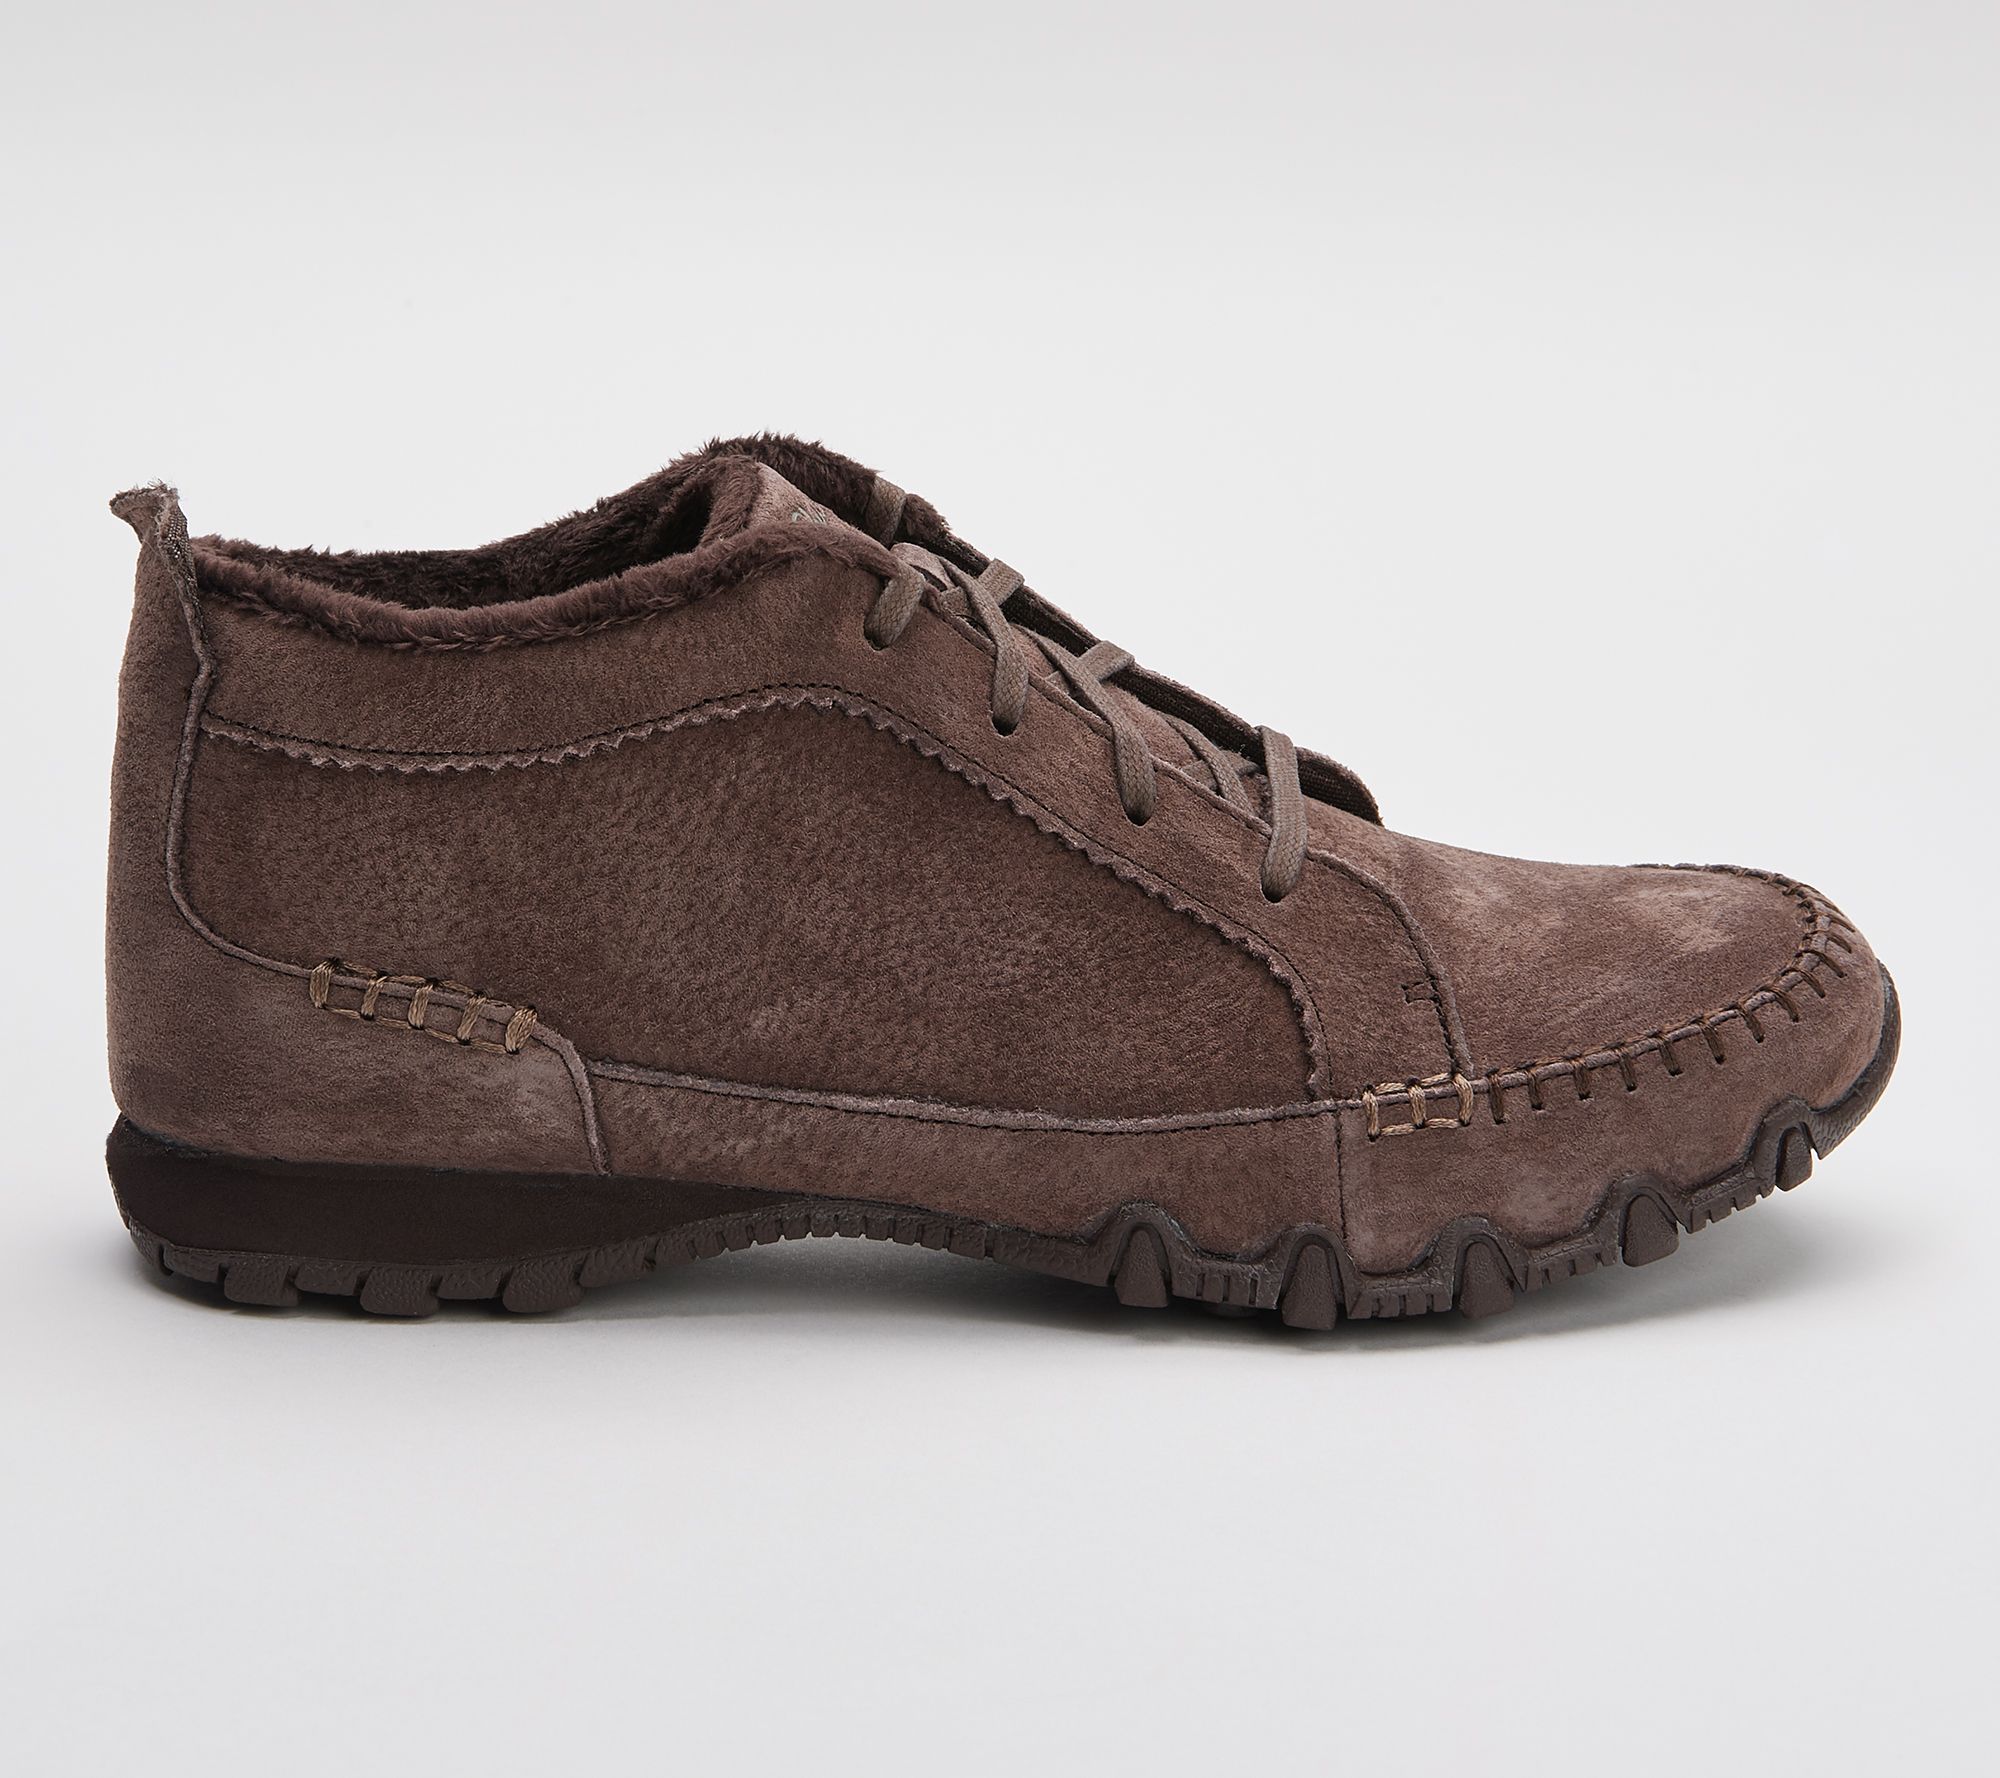 Skechers Lace-Up Booties - Bikers Lineage - QVC.com